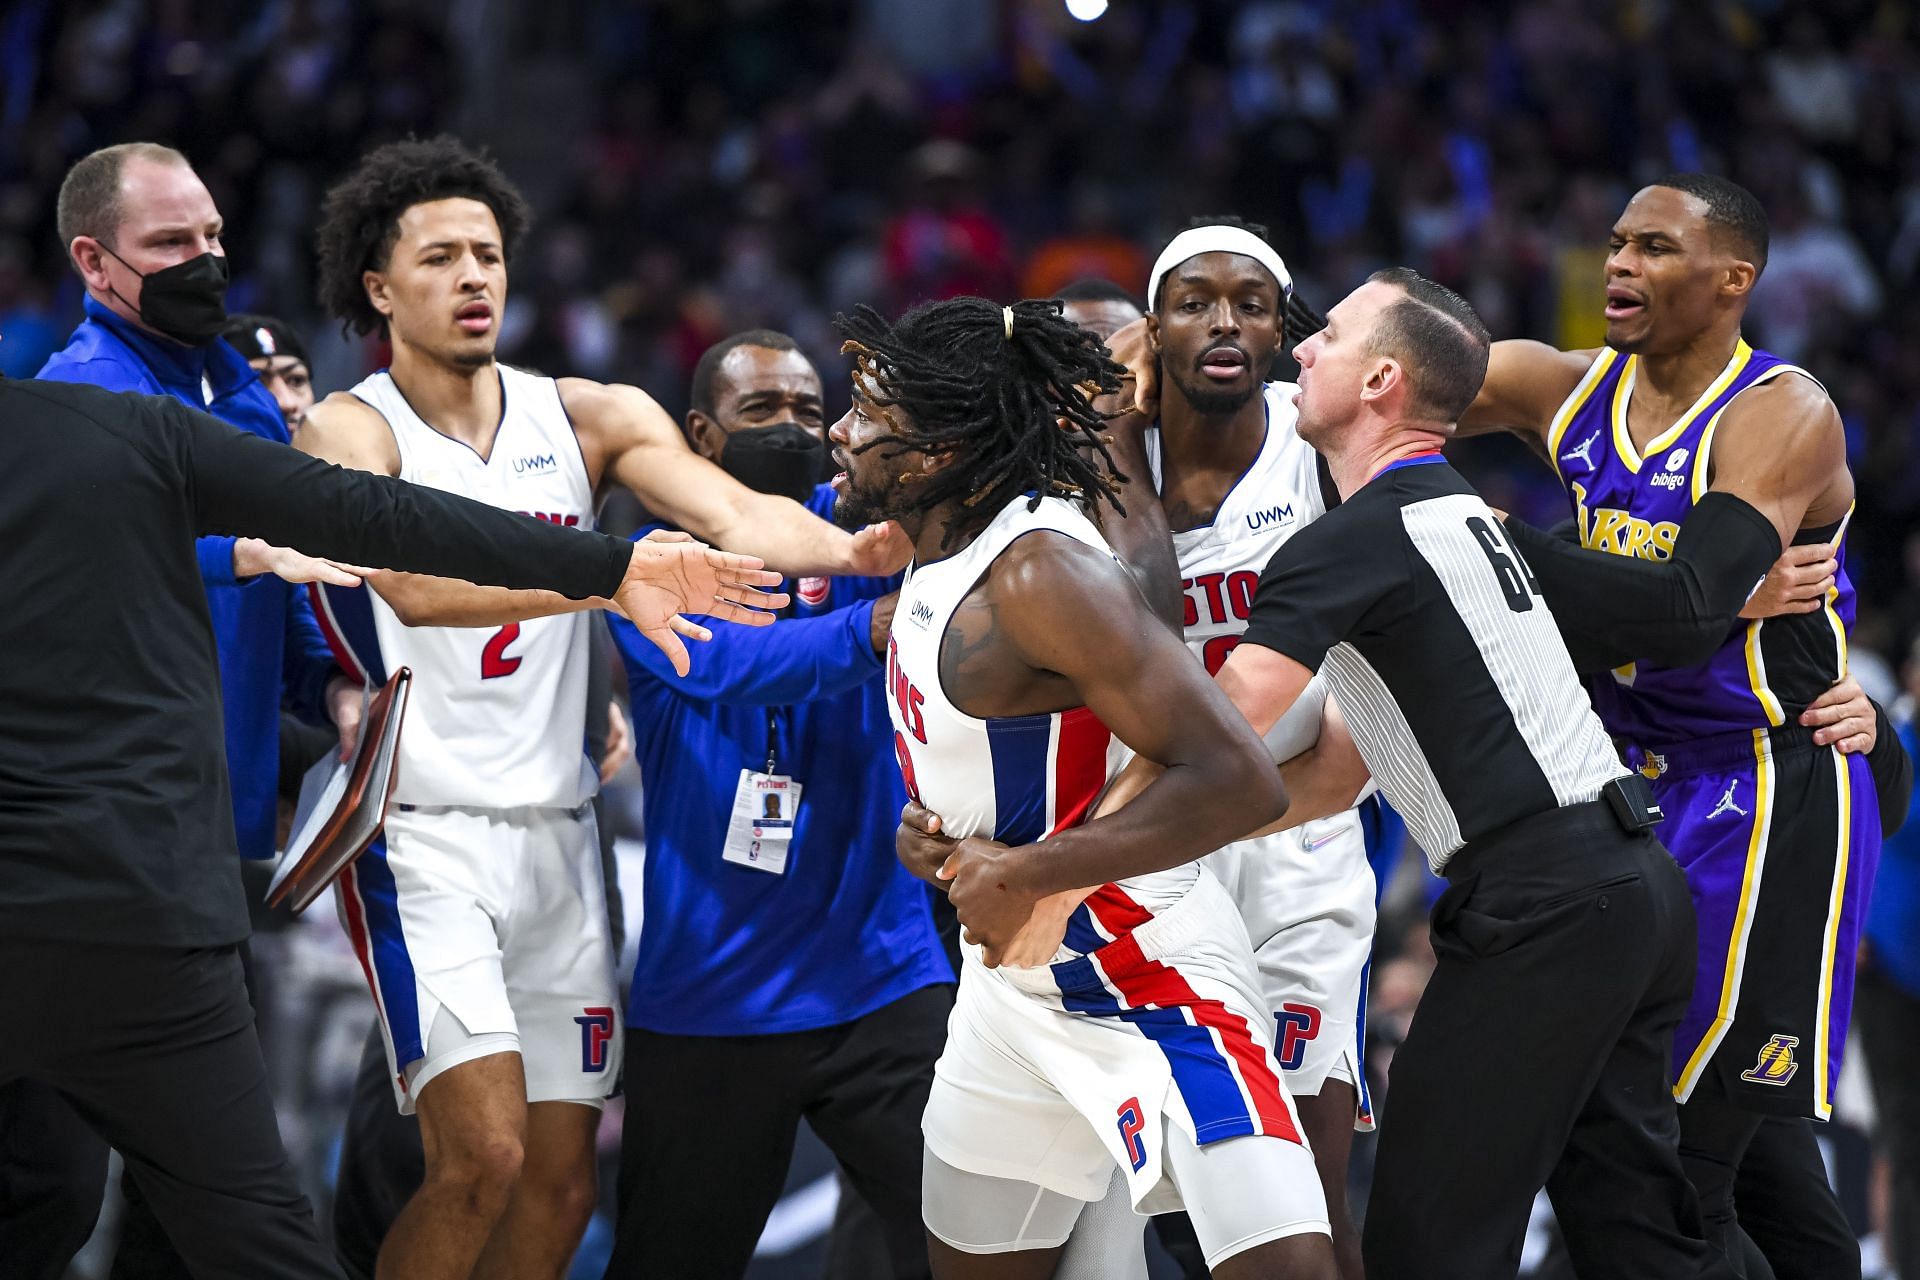 Isaiah Stewart #28 of the Detroit Pistons is restrained as he goes after LeBron James #6 of the Los Angeles Lakers during the third quarter of the game at Little Caesars Arena on November 21, 2021 in Detroit, Michigan.